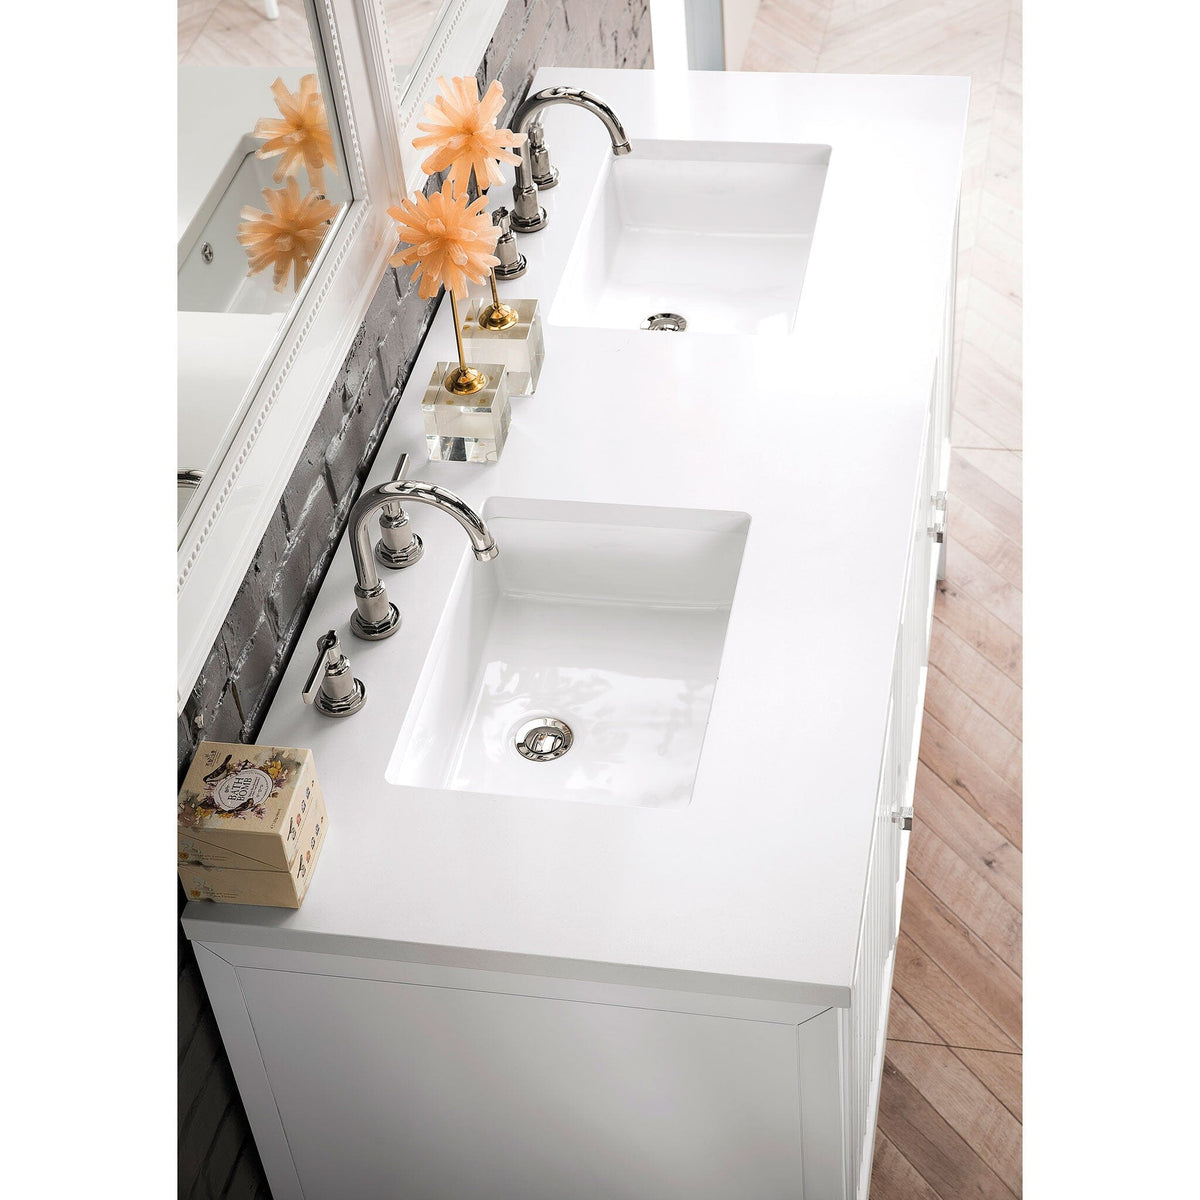 60" Athens Double Wall Mounted Bathroom Vanity, Glossy White